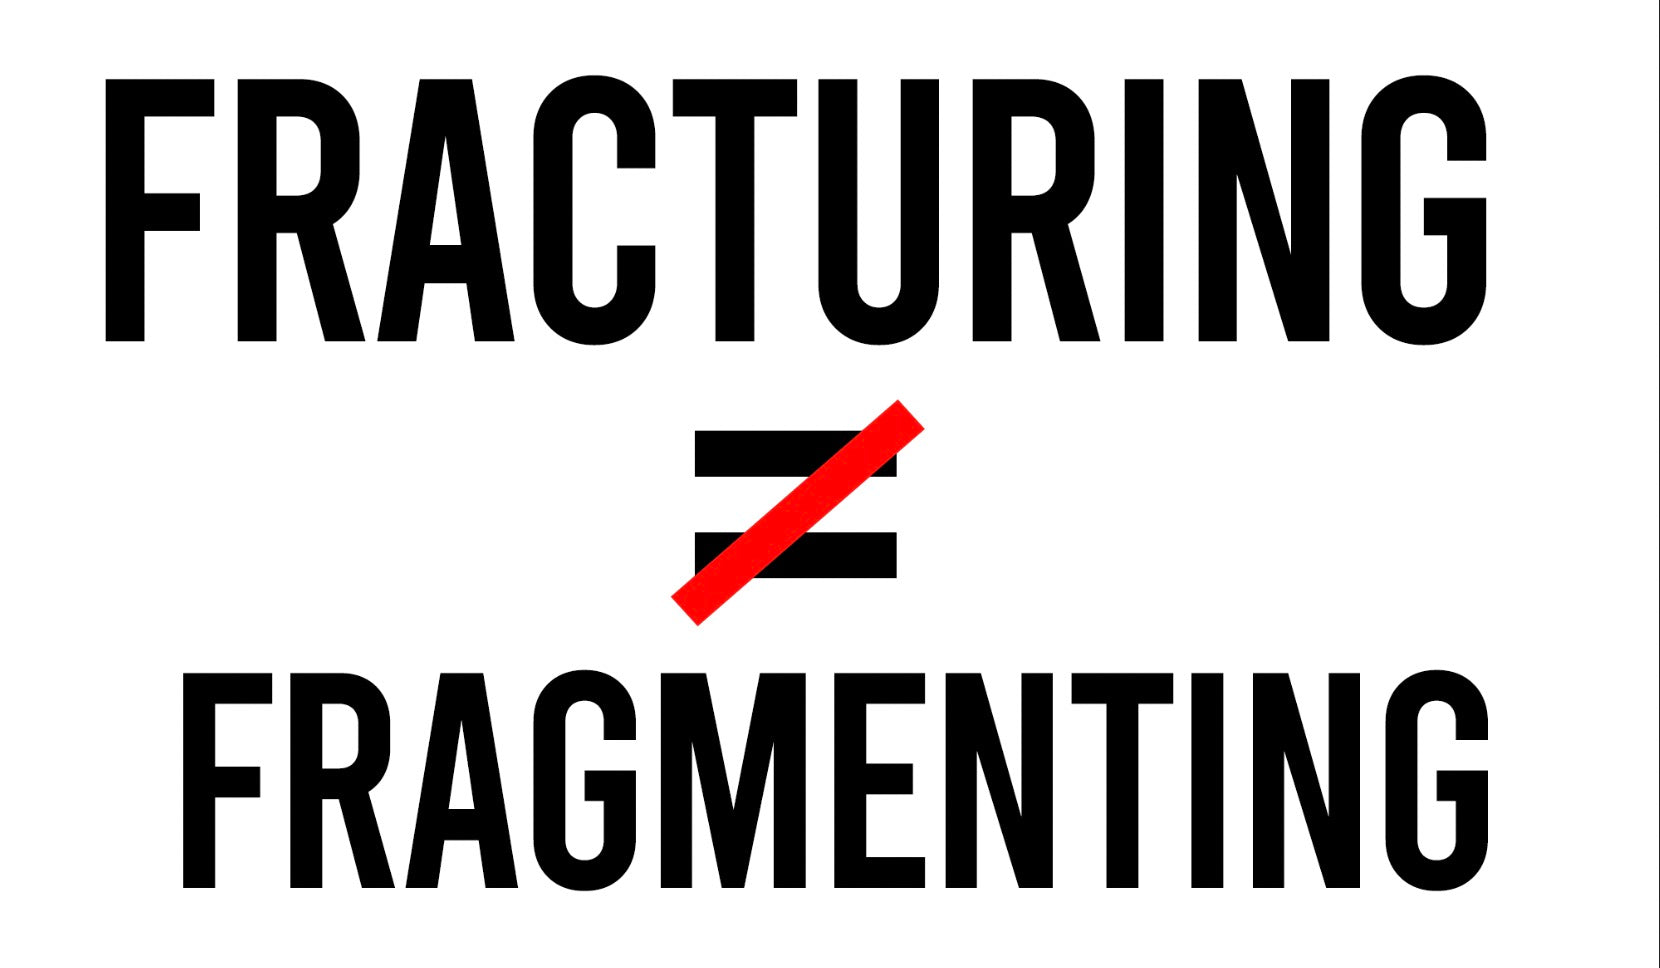 FRACTURING ≠ FRAGMENTING